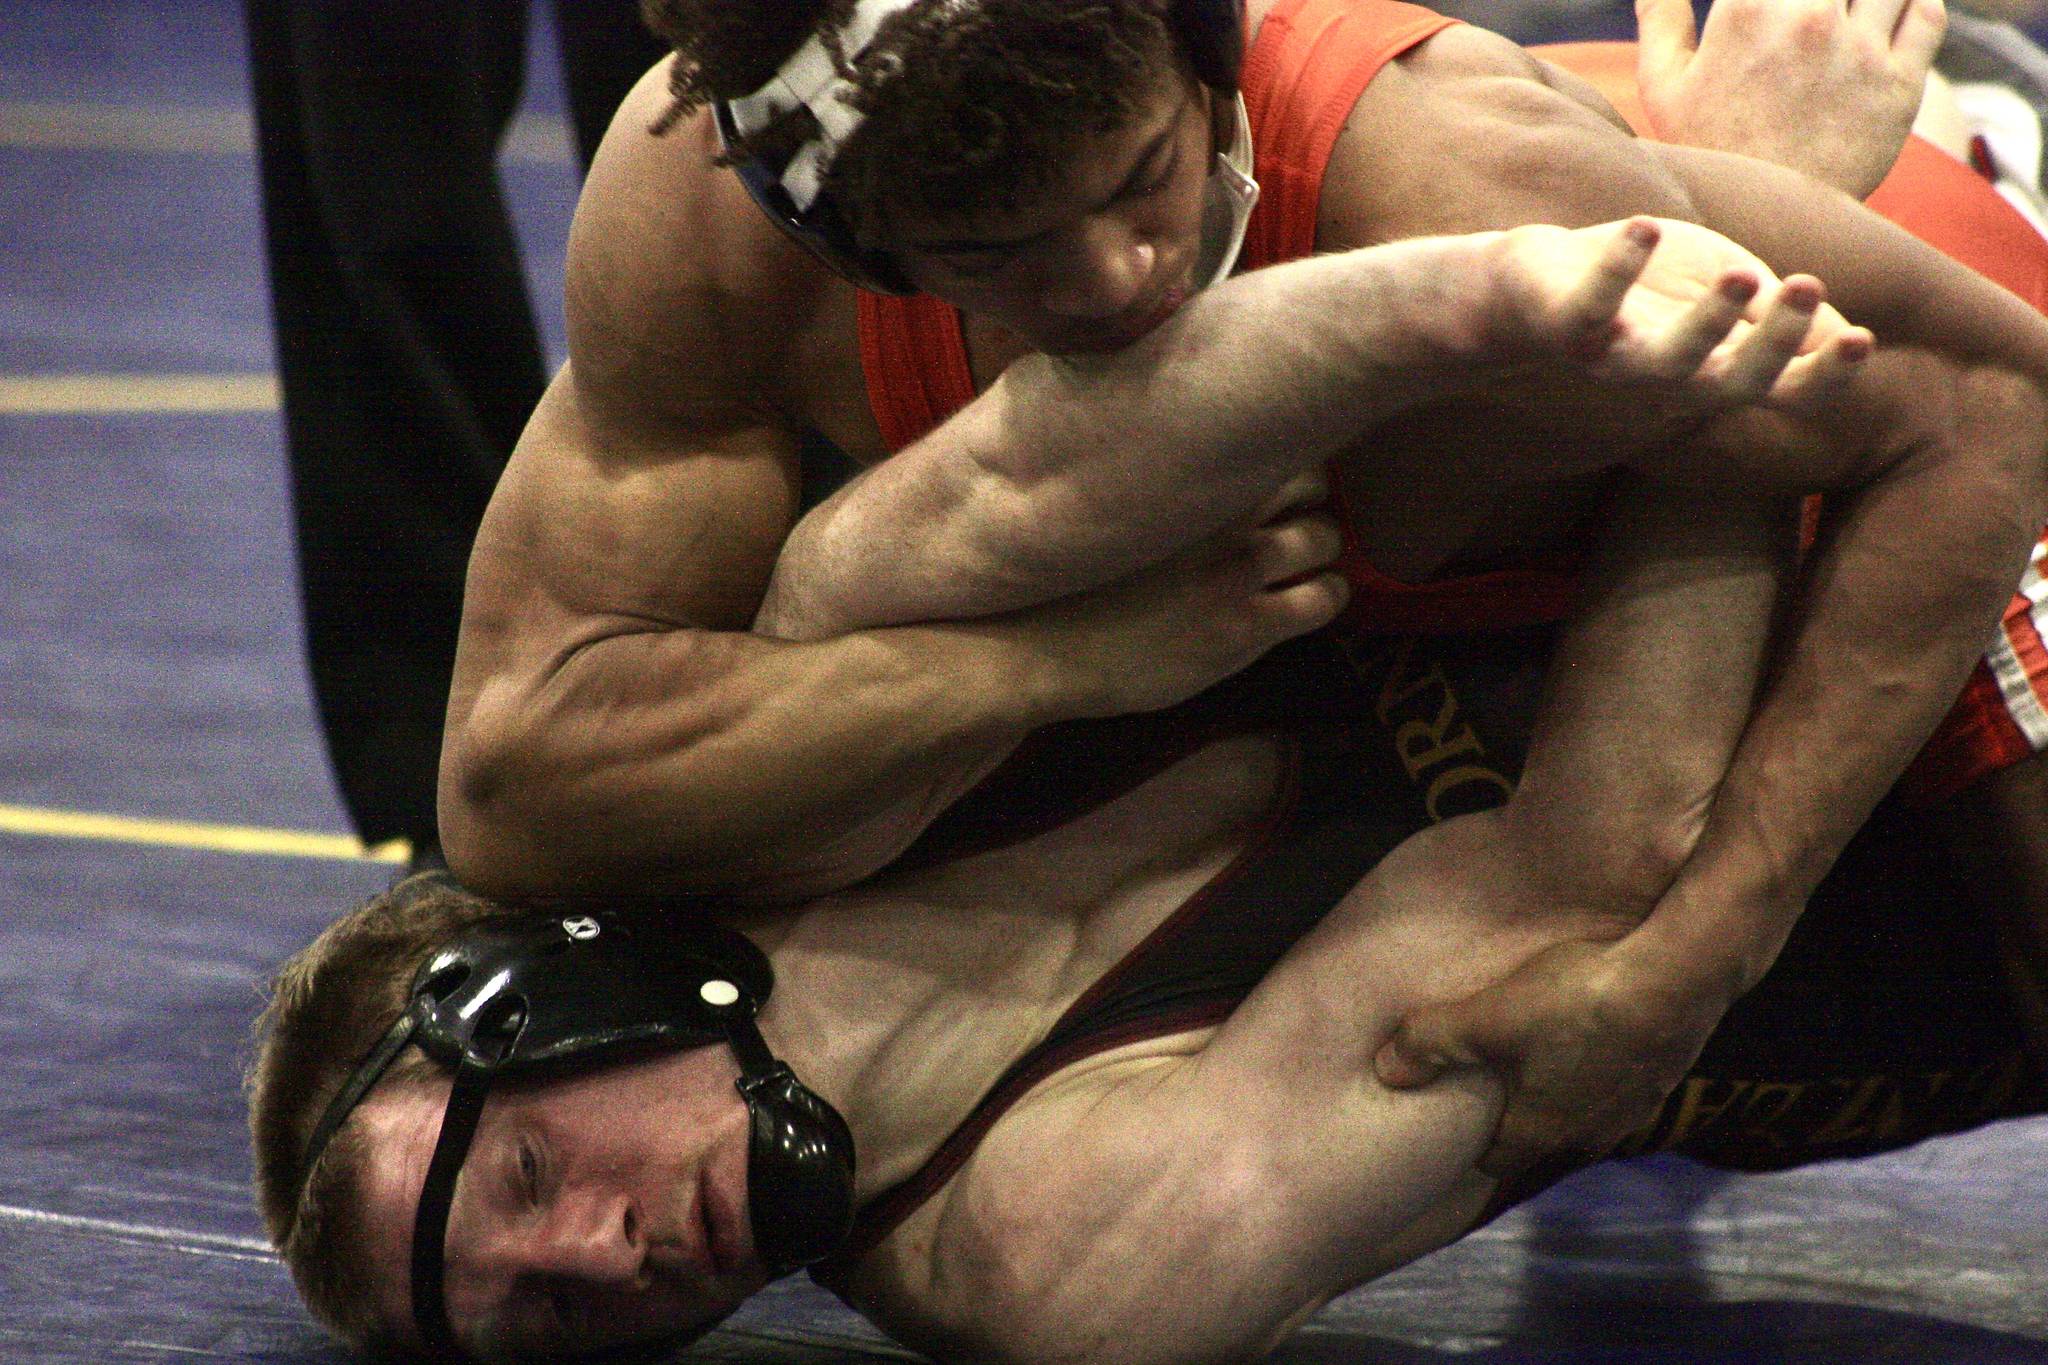 Auburn Mountainview’s Mahlik Walker ties up Enumclaw’s Aidan Carroll during their 138-pound regional finals bout at Tahoma High School in Maple Valley on Saturday. Walker took a 7-4 decision. MARK KLAAS, Auburn Reporter